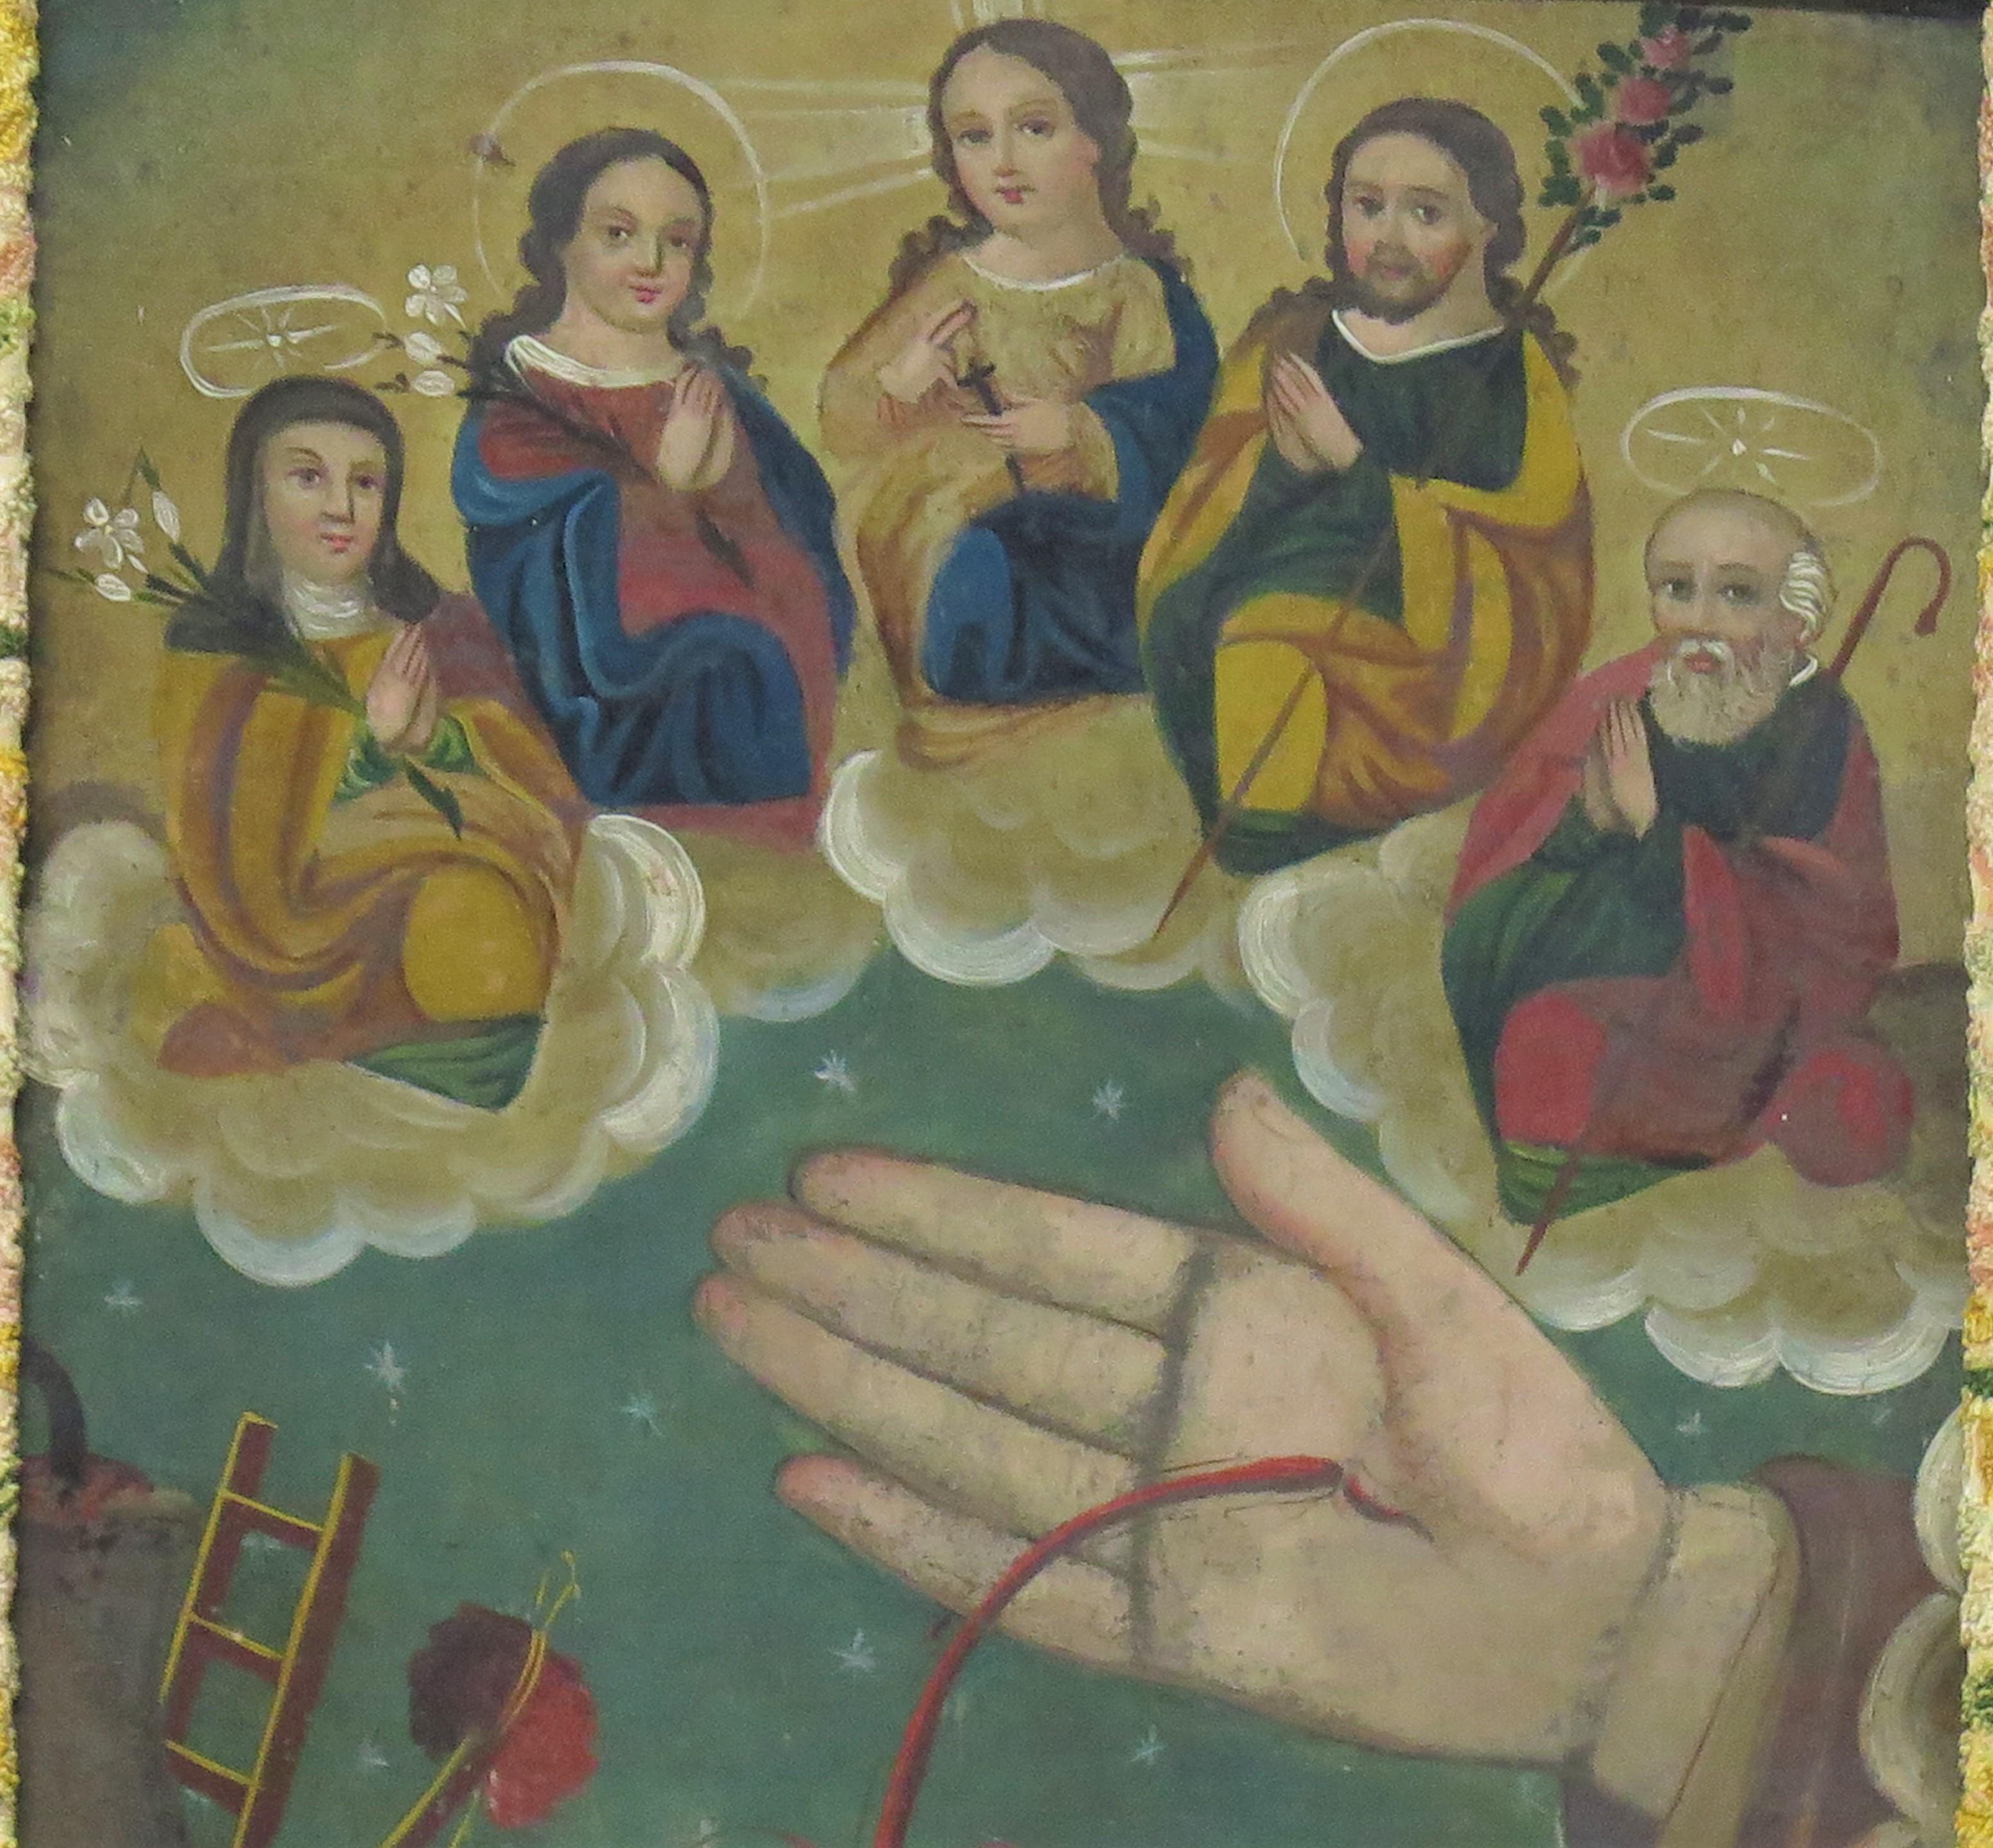 a 19th century oil on tin retablo La Mano Poderosa, or The Powerful Hand of God – sometimes referred to as Los Cinco Personas, a reference to the extended Holy Family in the upper quadrant. The five figures at the top represent Anne, Mary, Santo